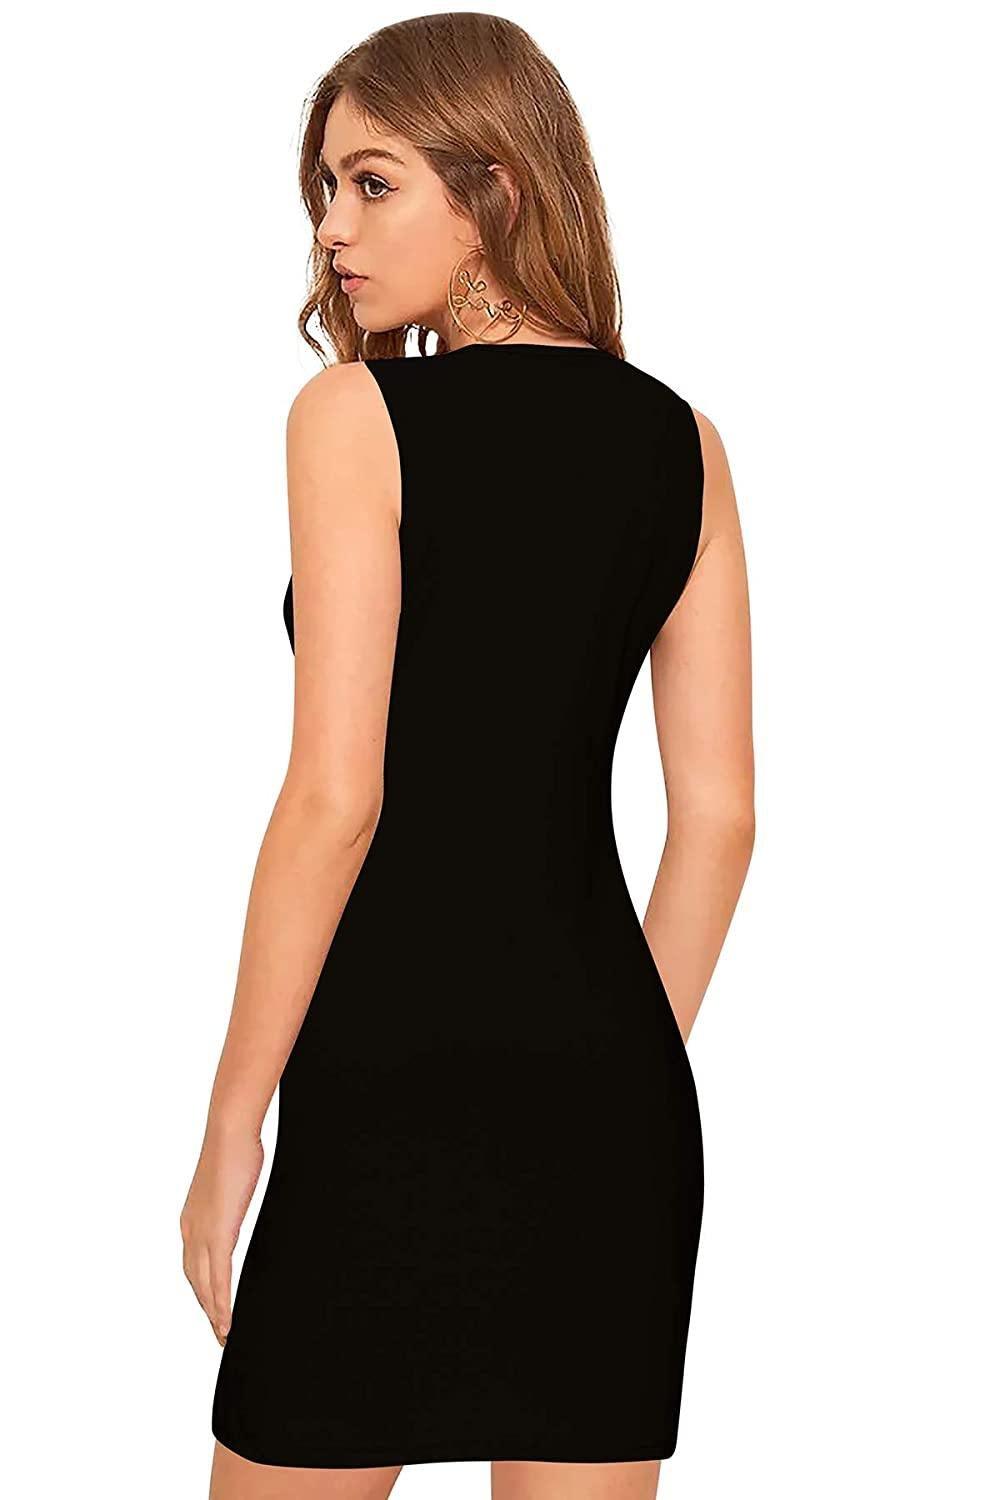 Dresses | Forever 21 Bodycon Dress | Freeup